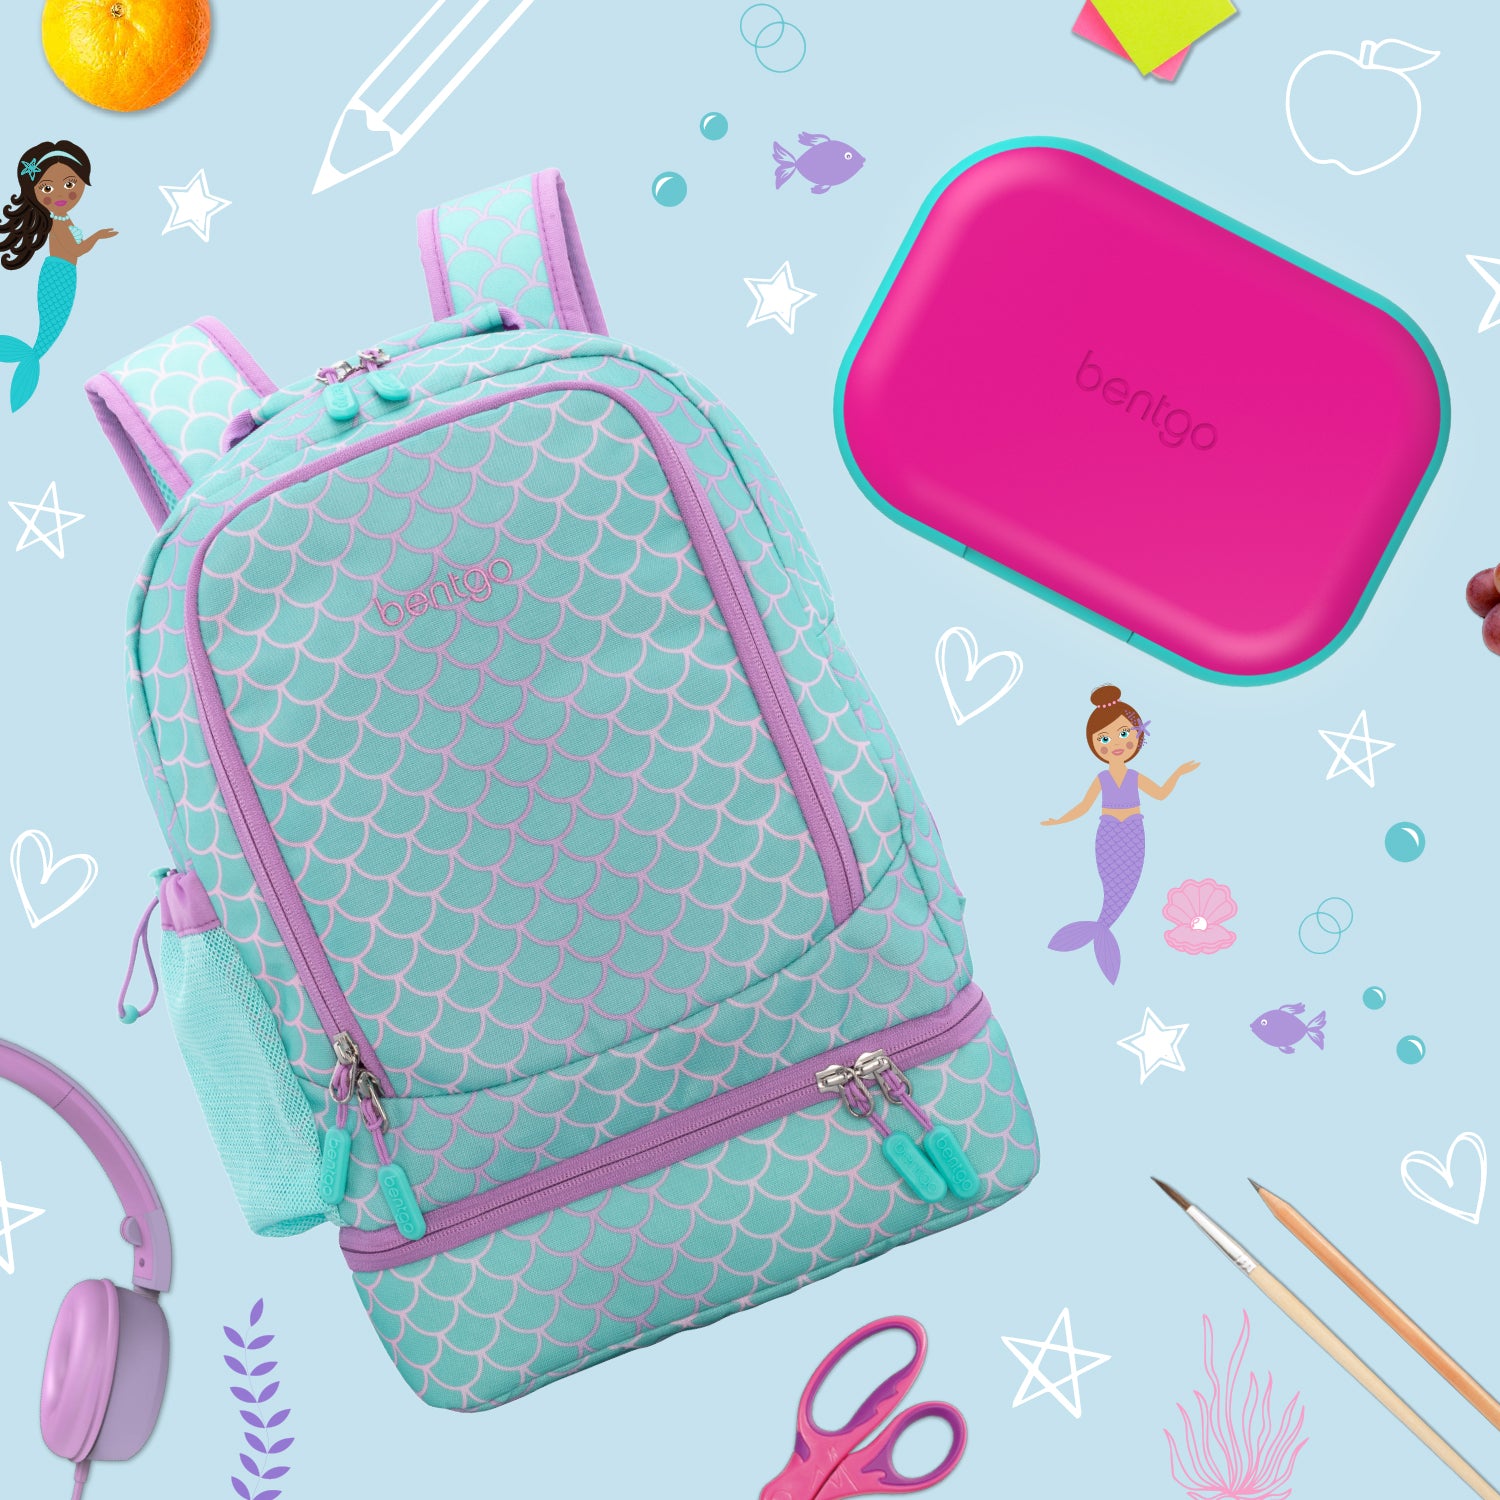 My youngest has been loving the @bentgo pop lunchbox! I am loving